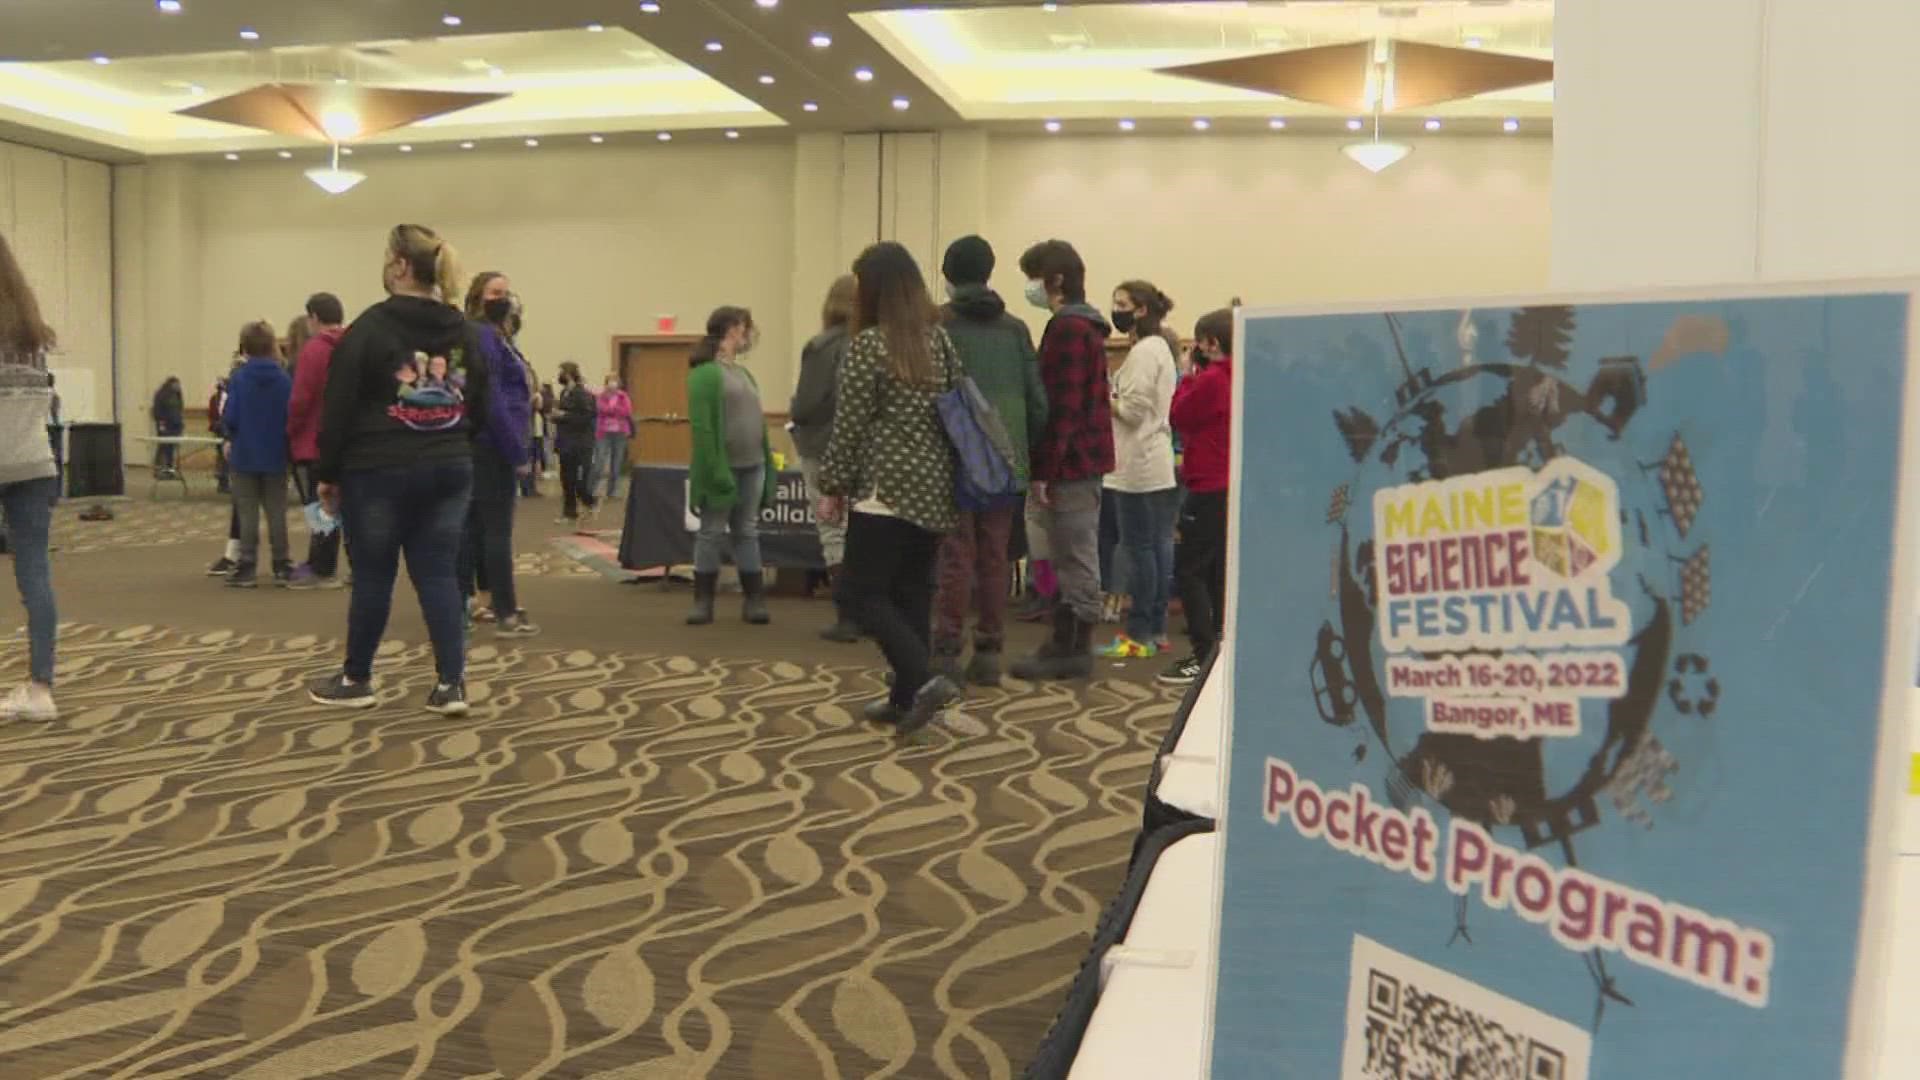 The Maine Science Festival is in full swing